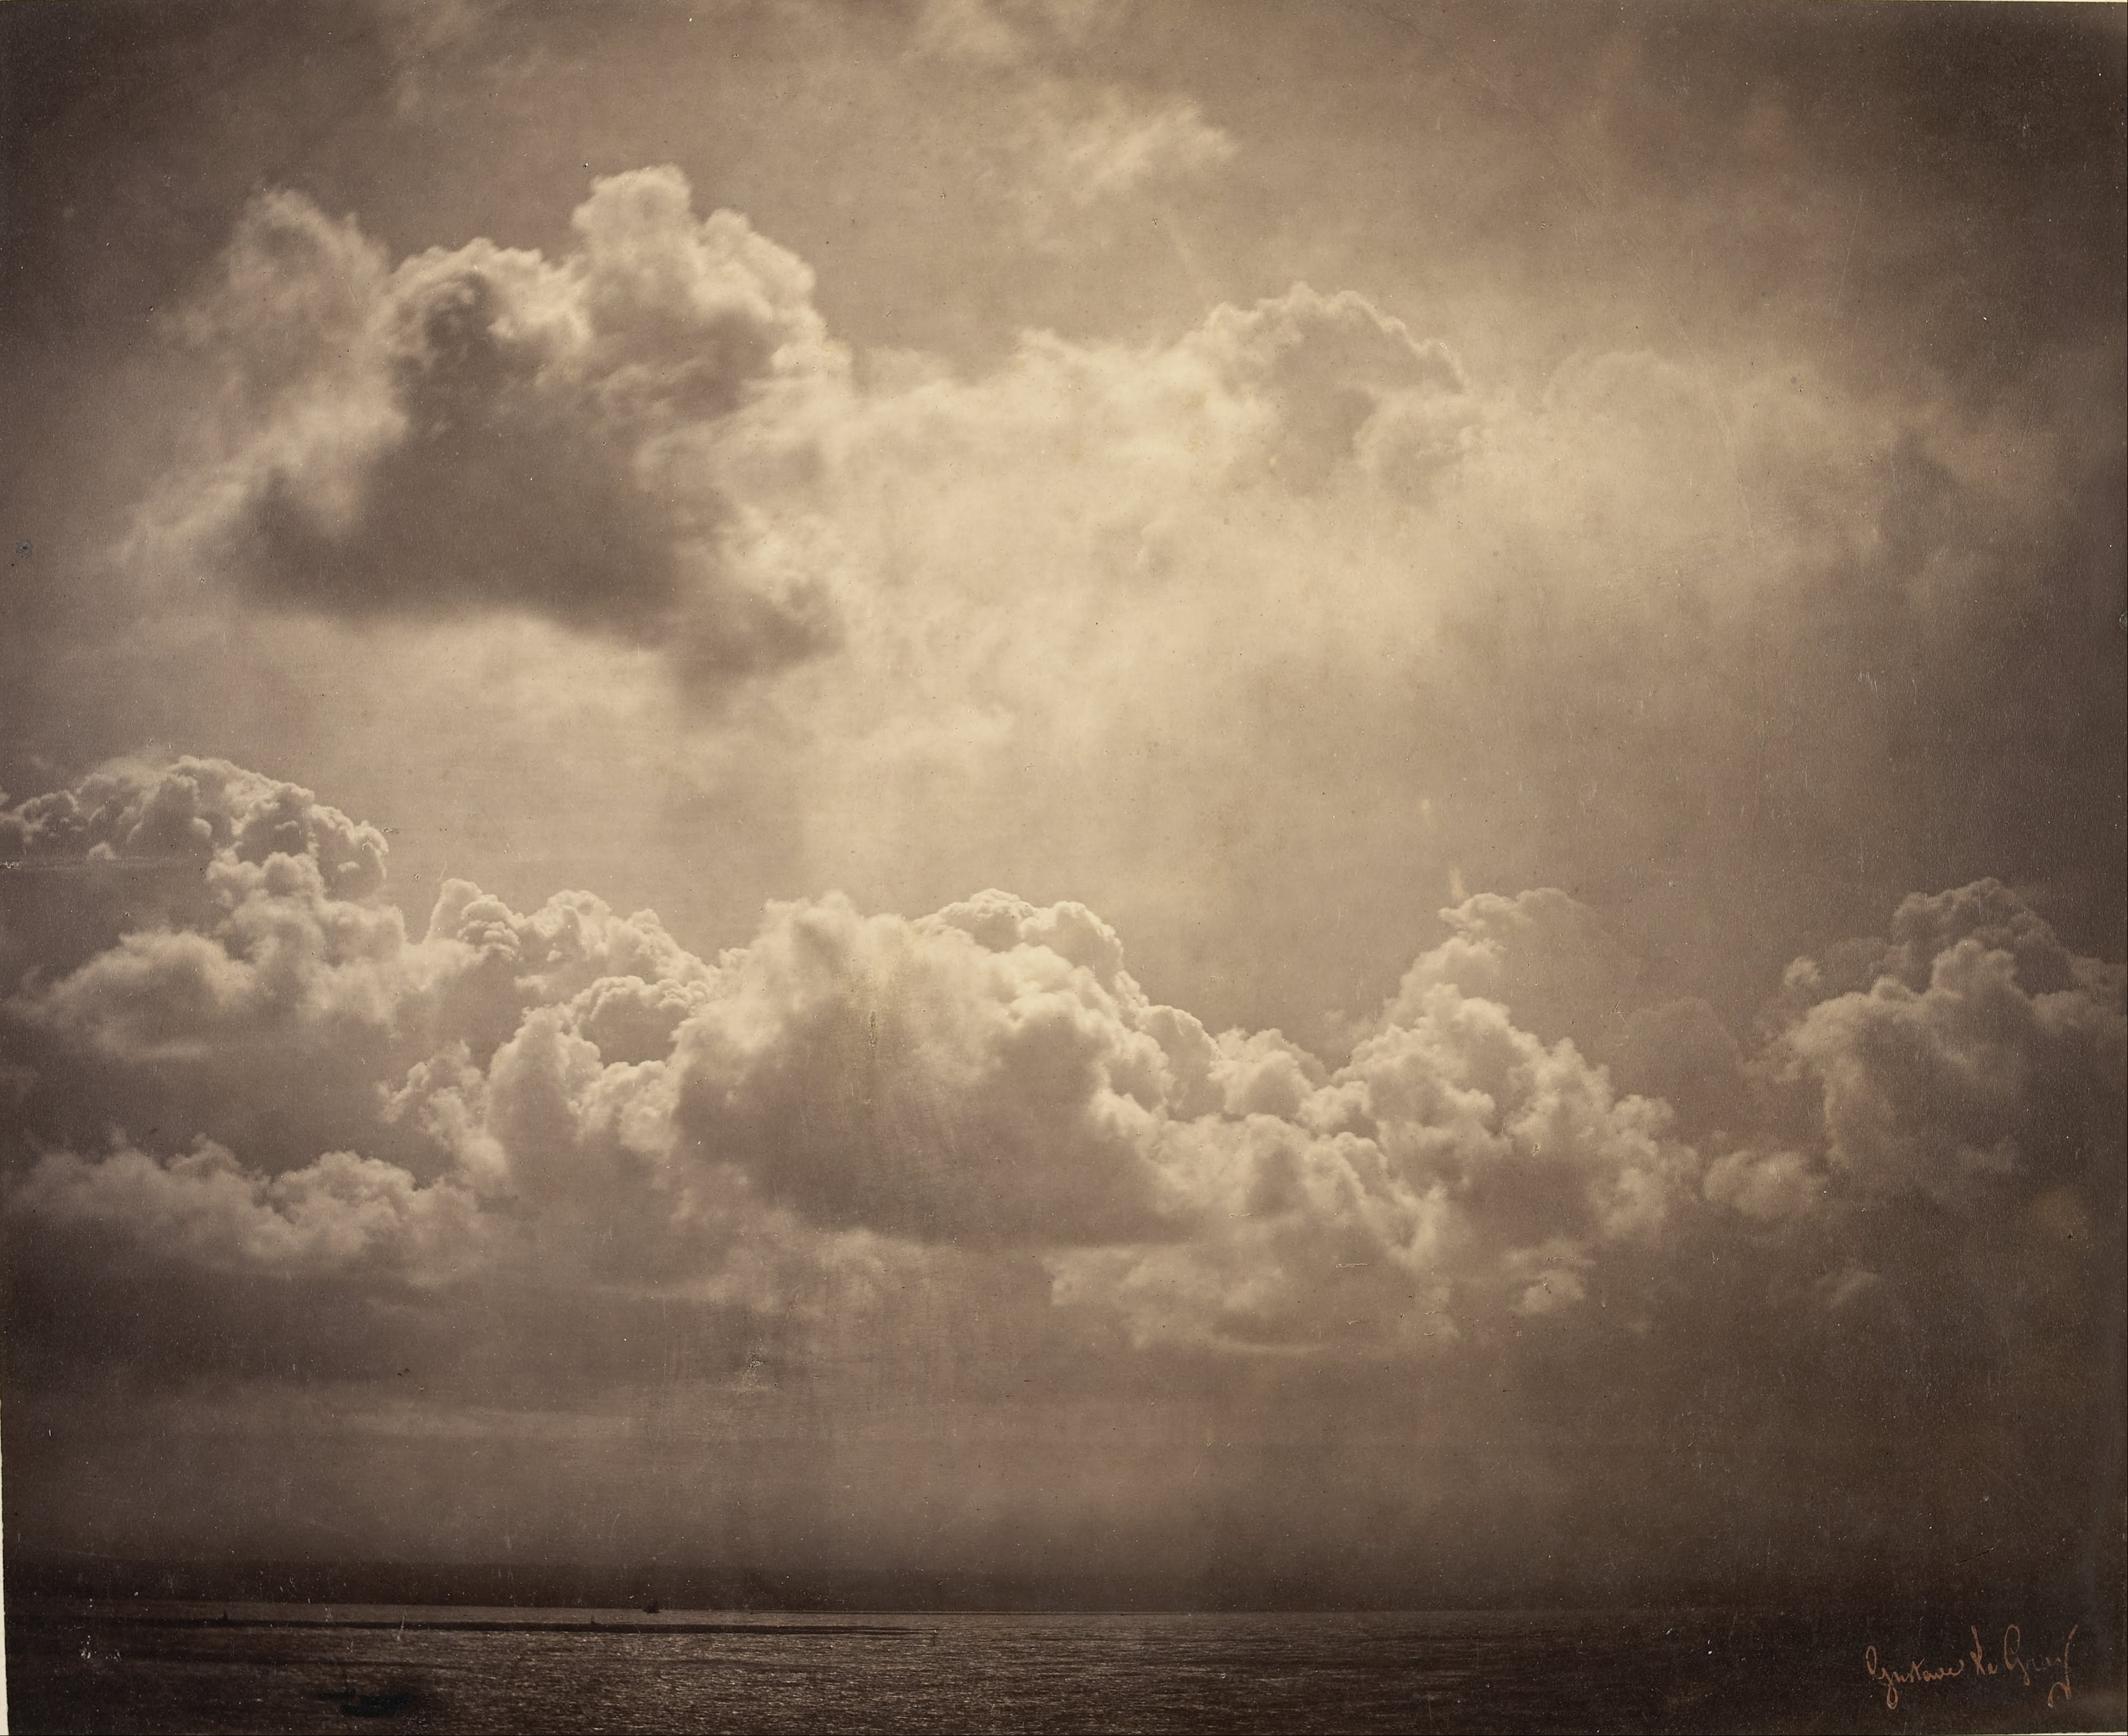 Gustave_Le_Gray_-_Gustave_Le_Gray_-_Google_Art_Project